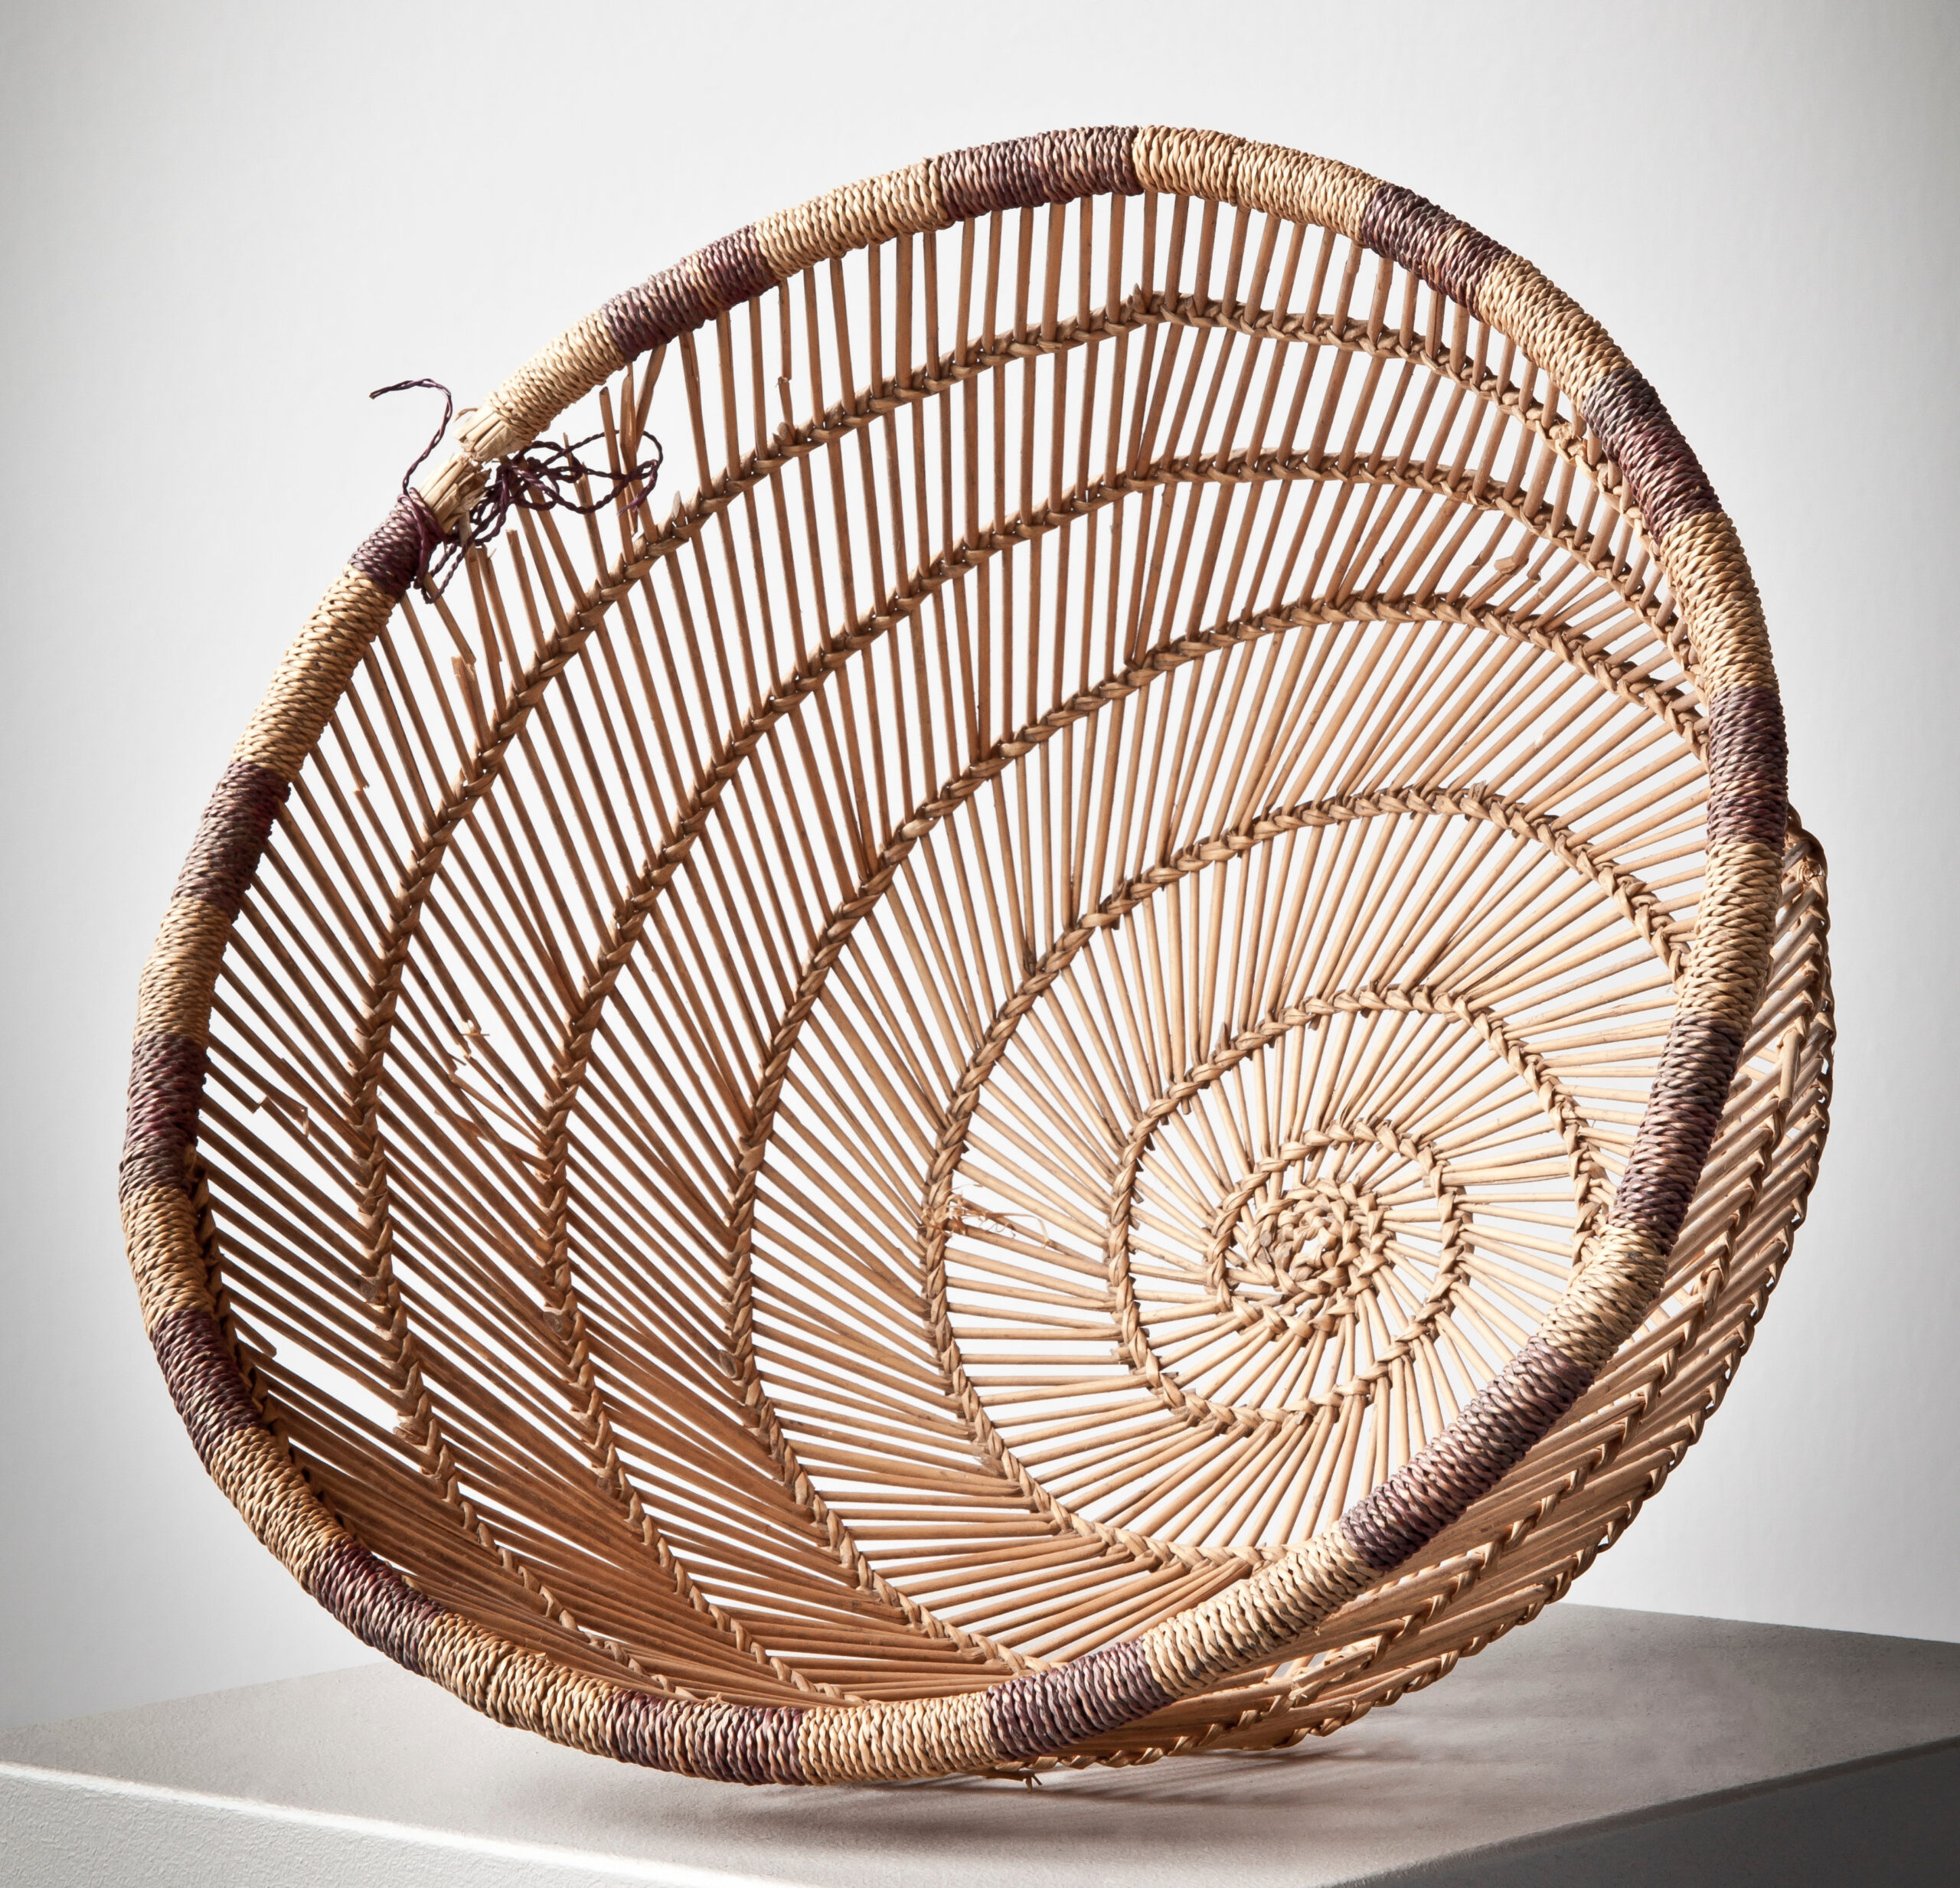 Sieve basket woven from plant fibers